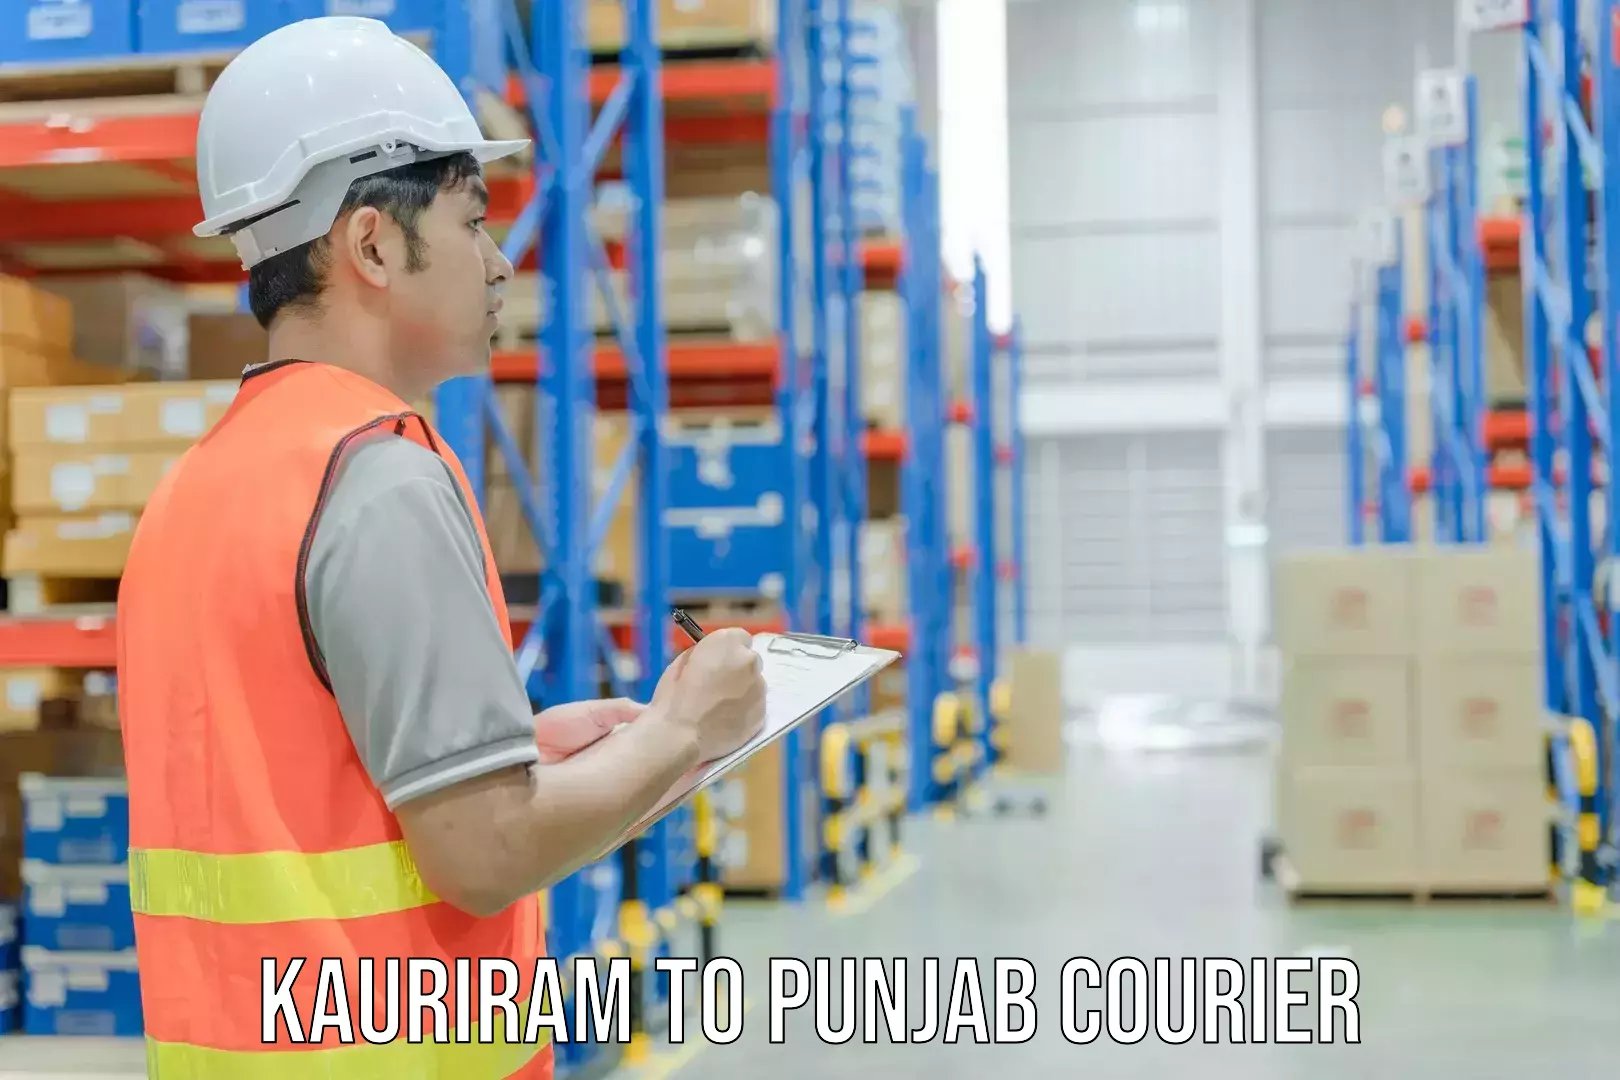 Courier service efficiency Kauriram to Malout